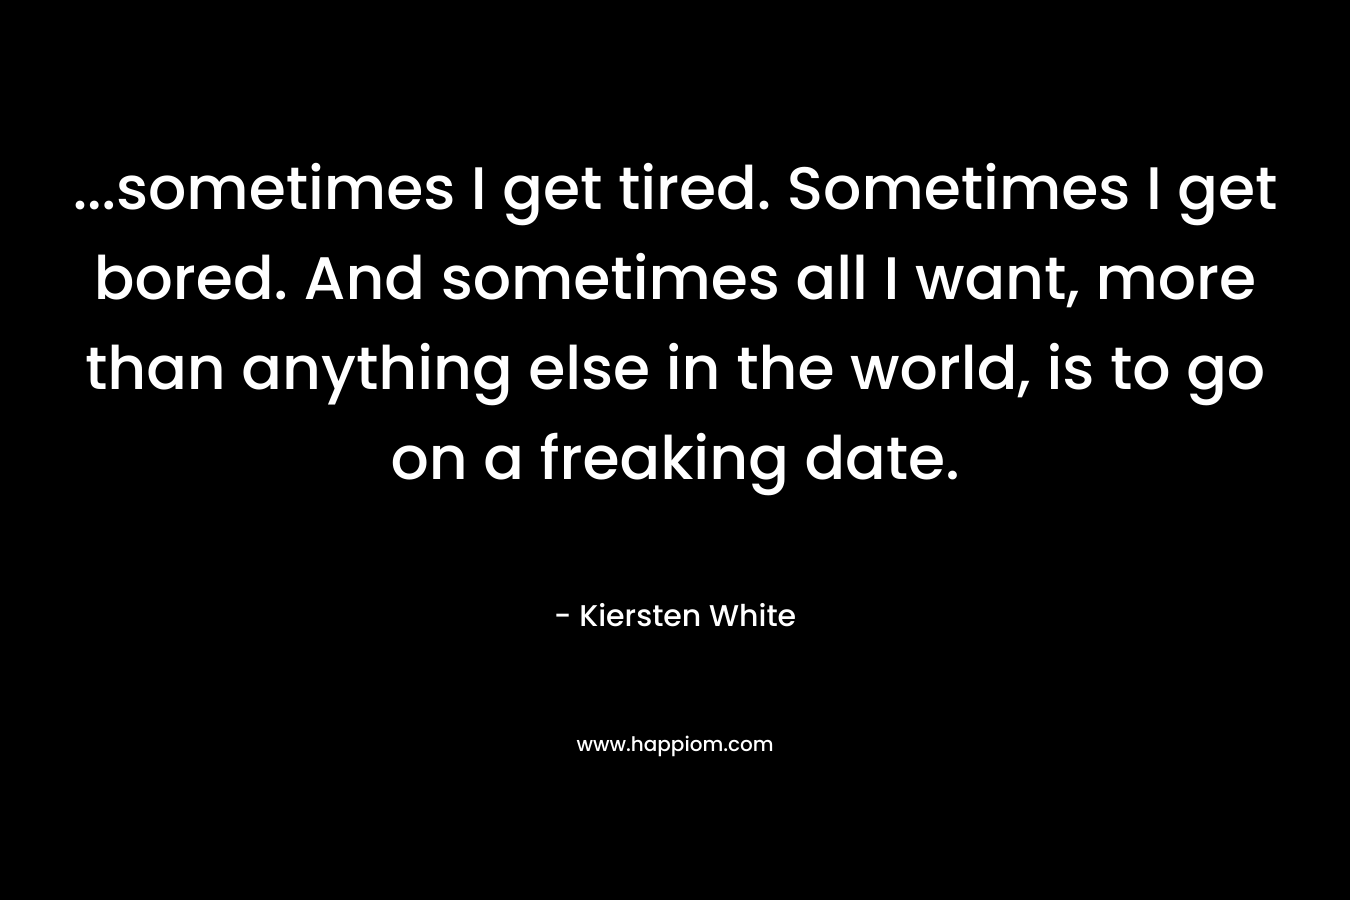 ...sometimes I get tired. Sometimes I get bored. And sometimes all I want, more than anything else in the world, is to go on a freaking date.